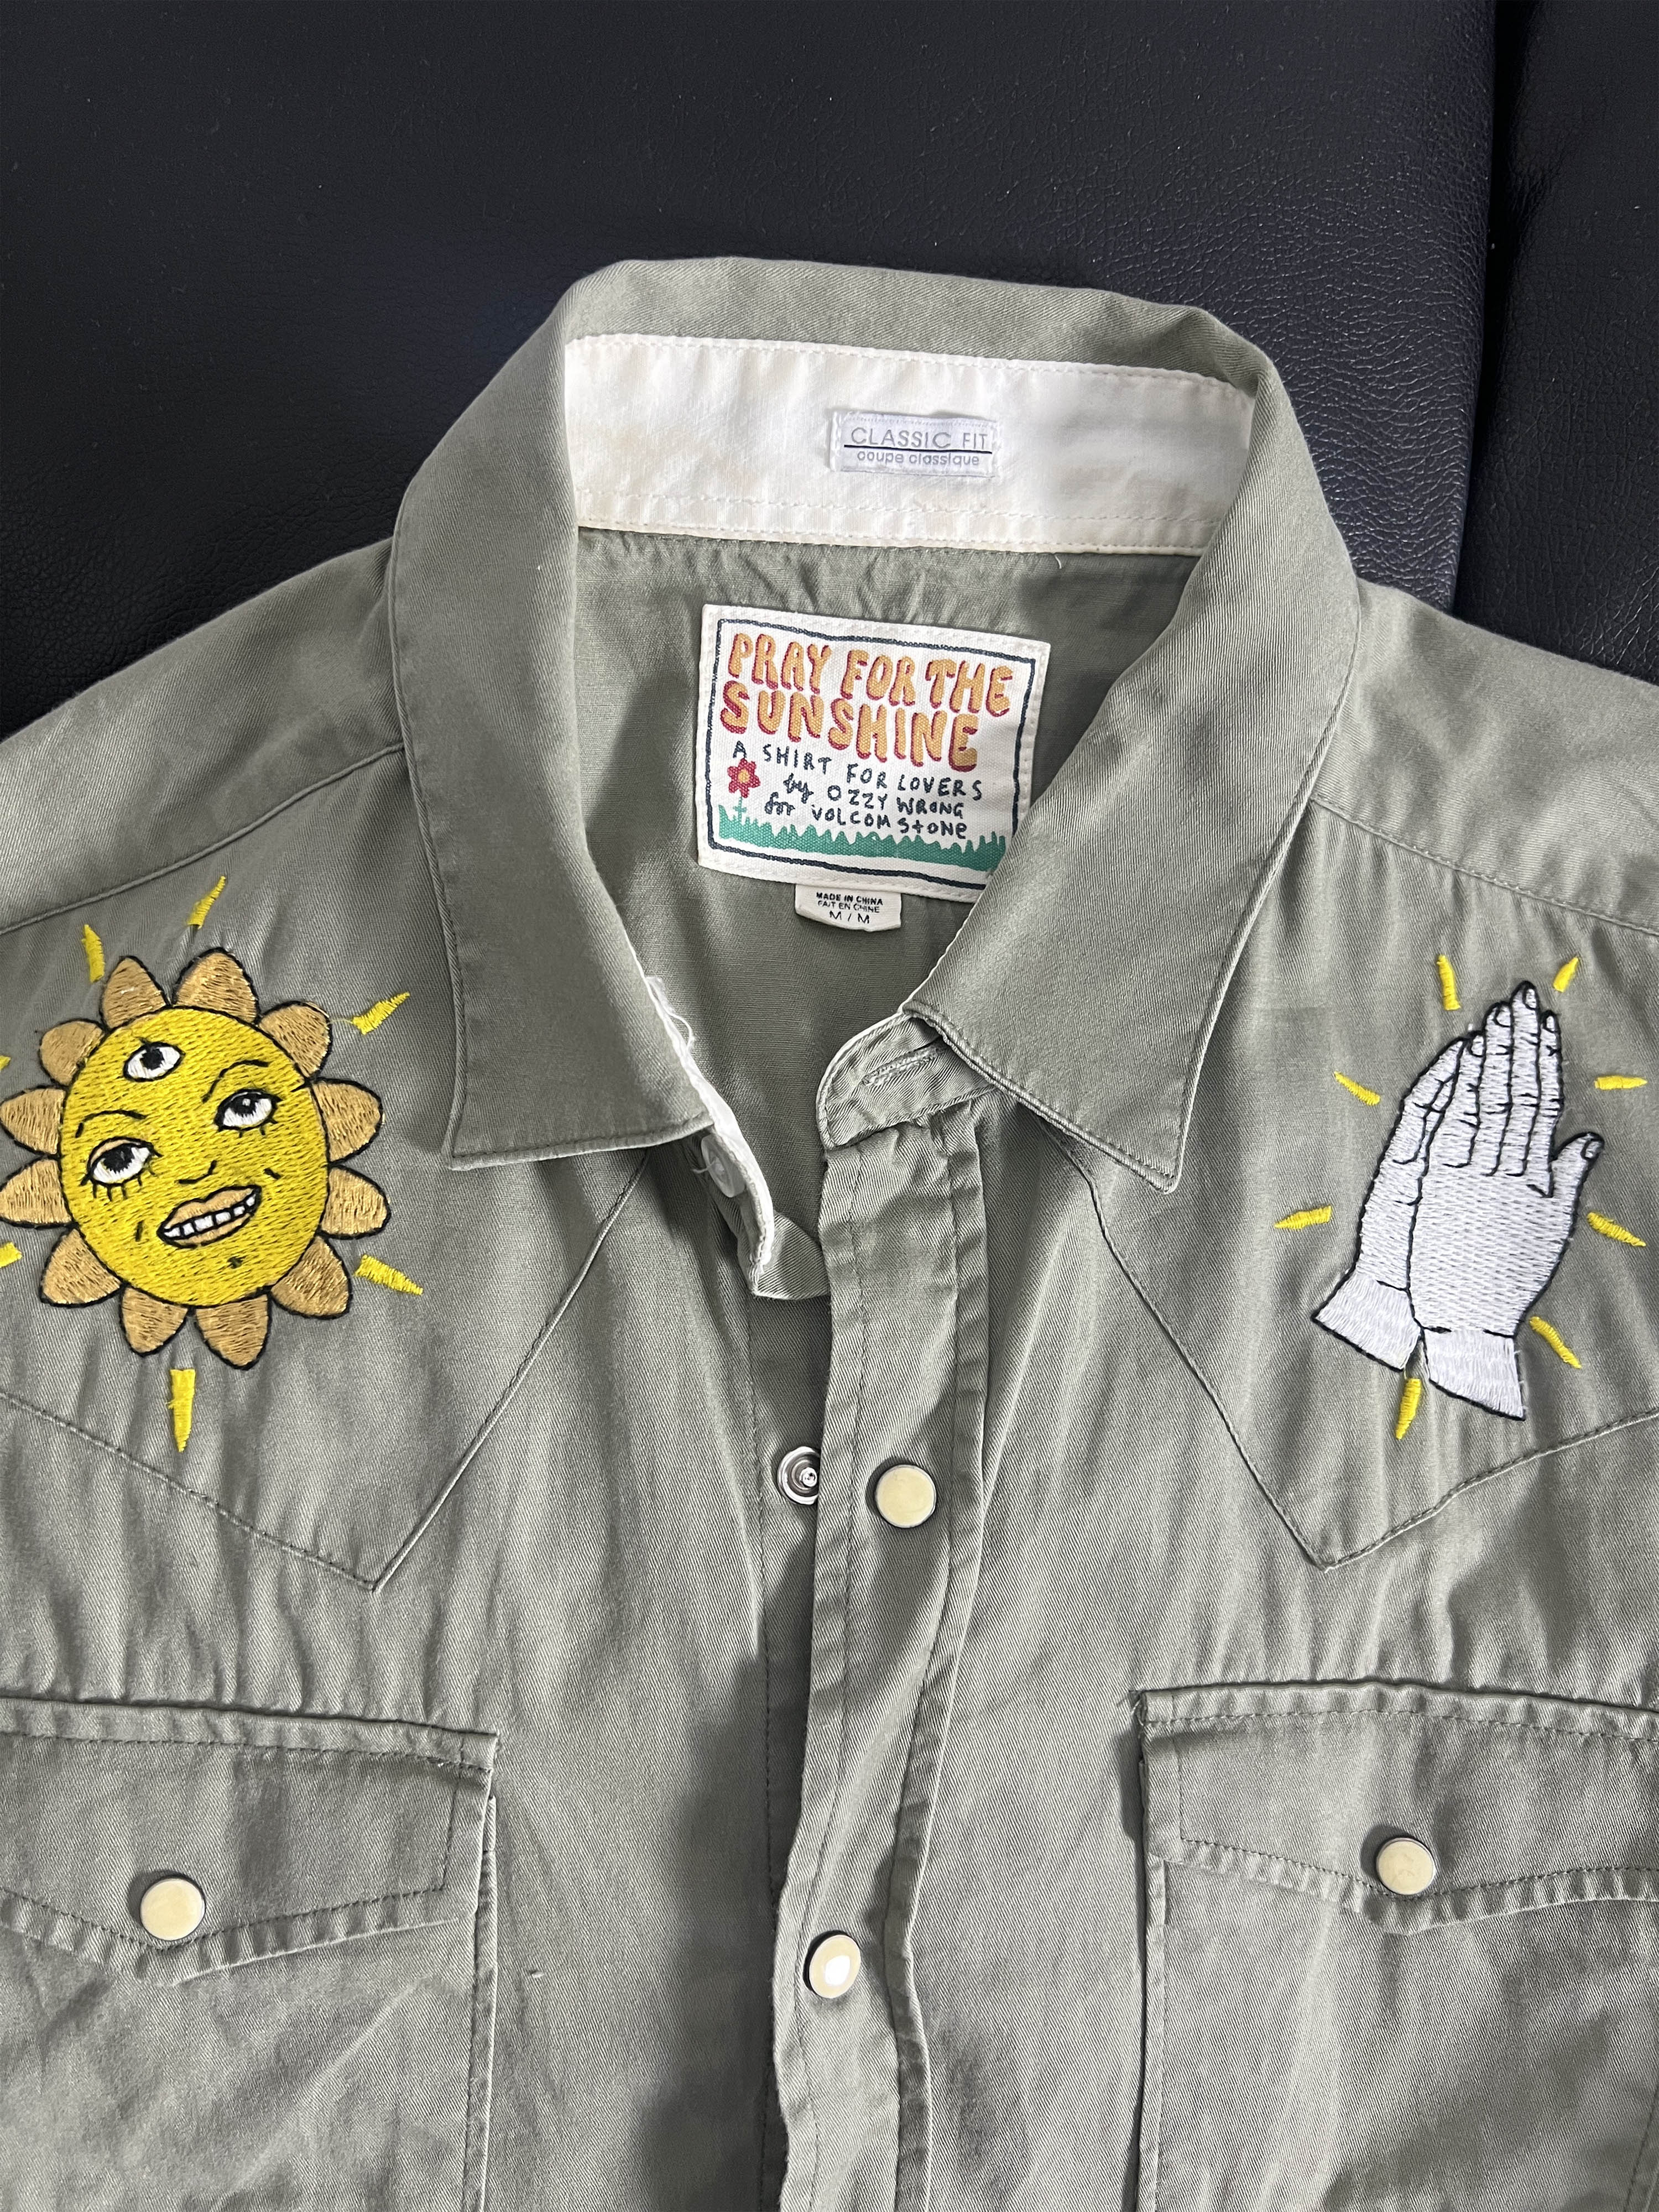 PRAY FOR THE SUNSHINE by VOLCOM western shirts